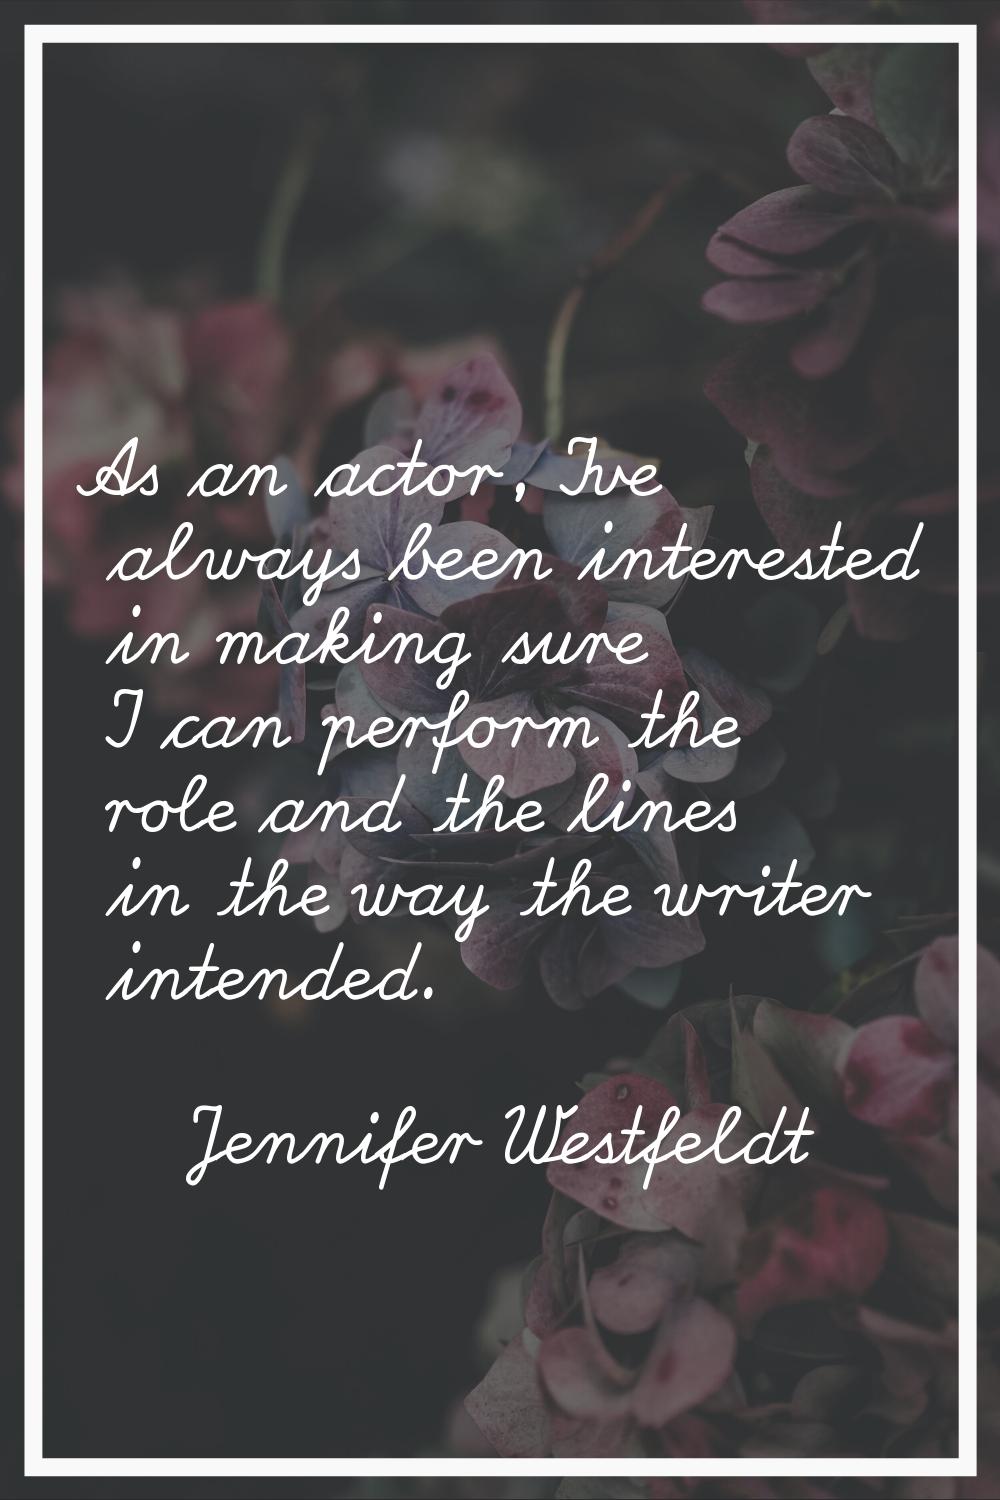 As an actor, I've always been interested in making sure I can perform the role and the lines in the